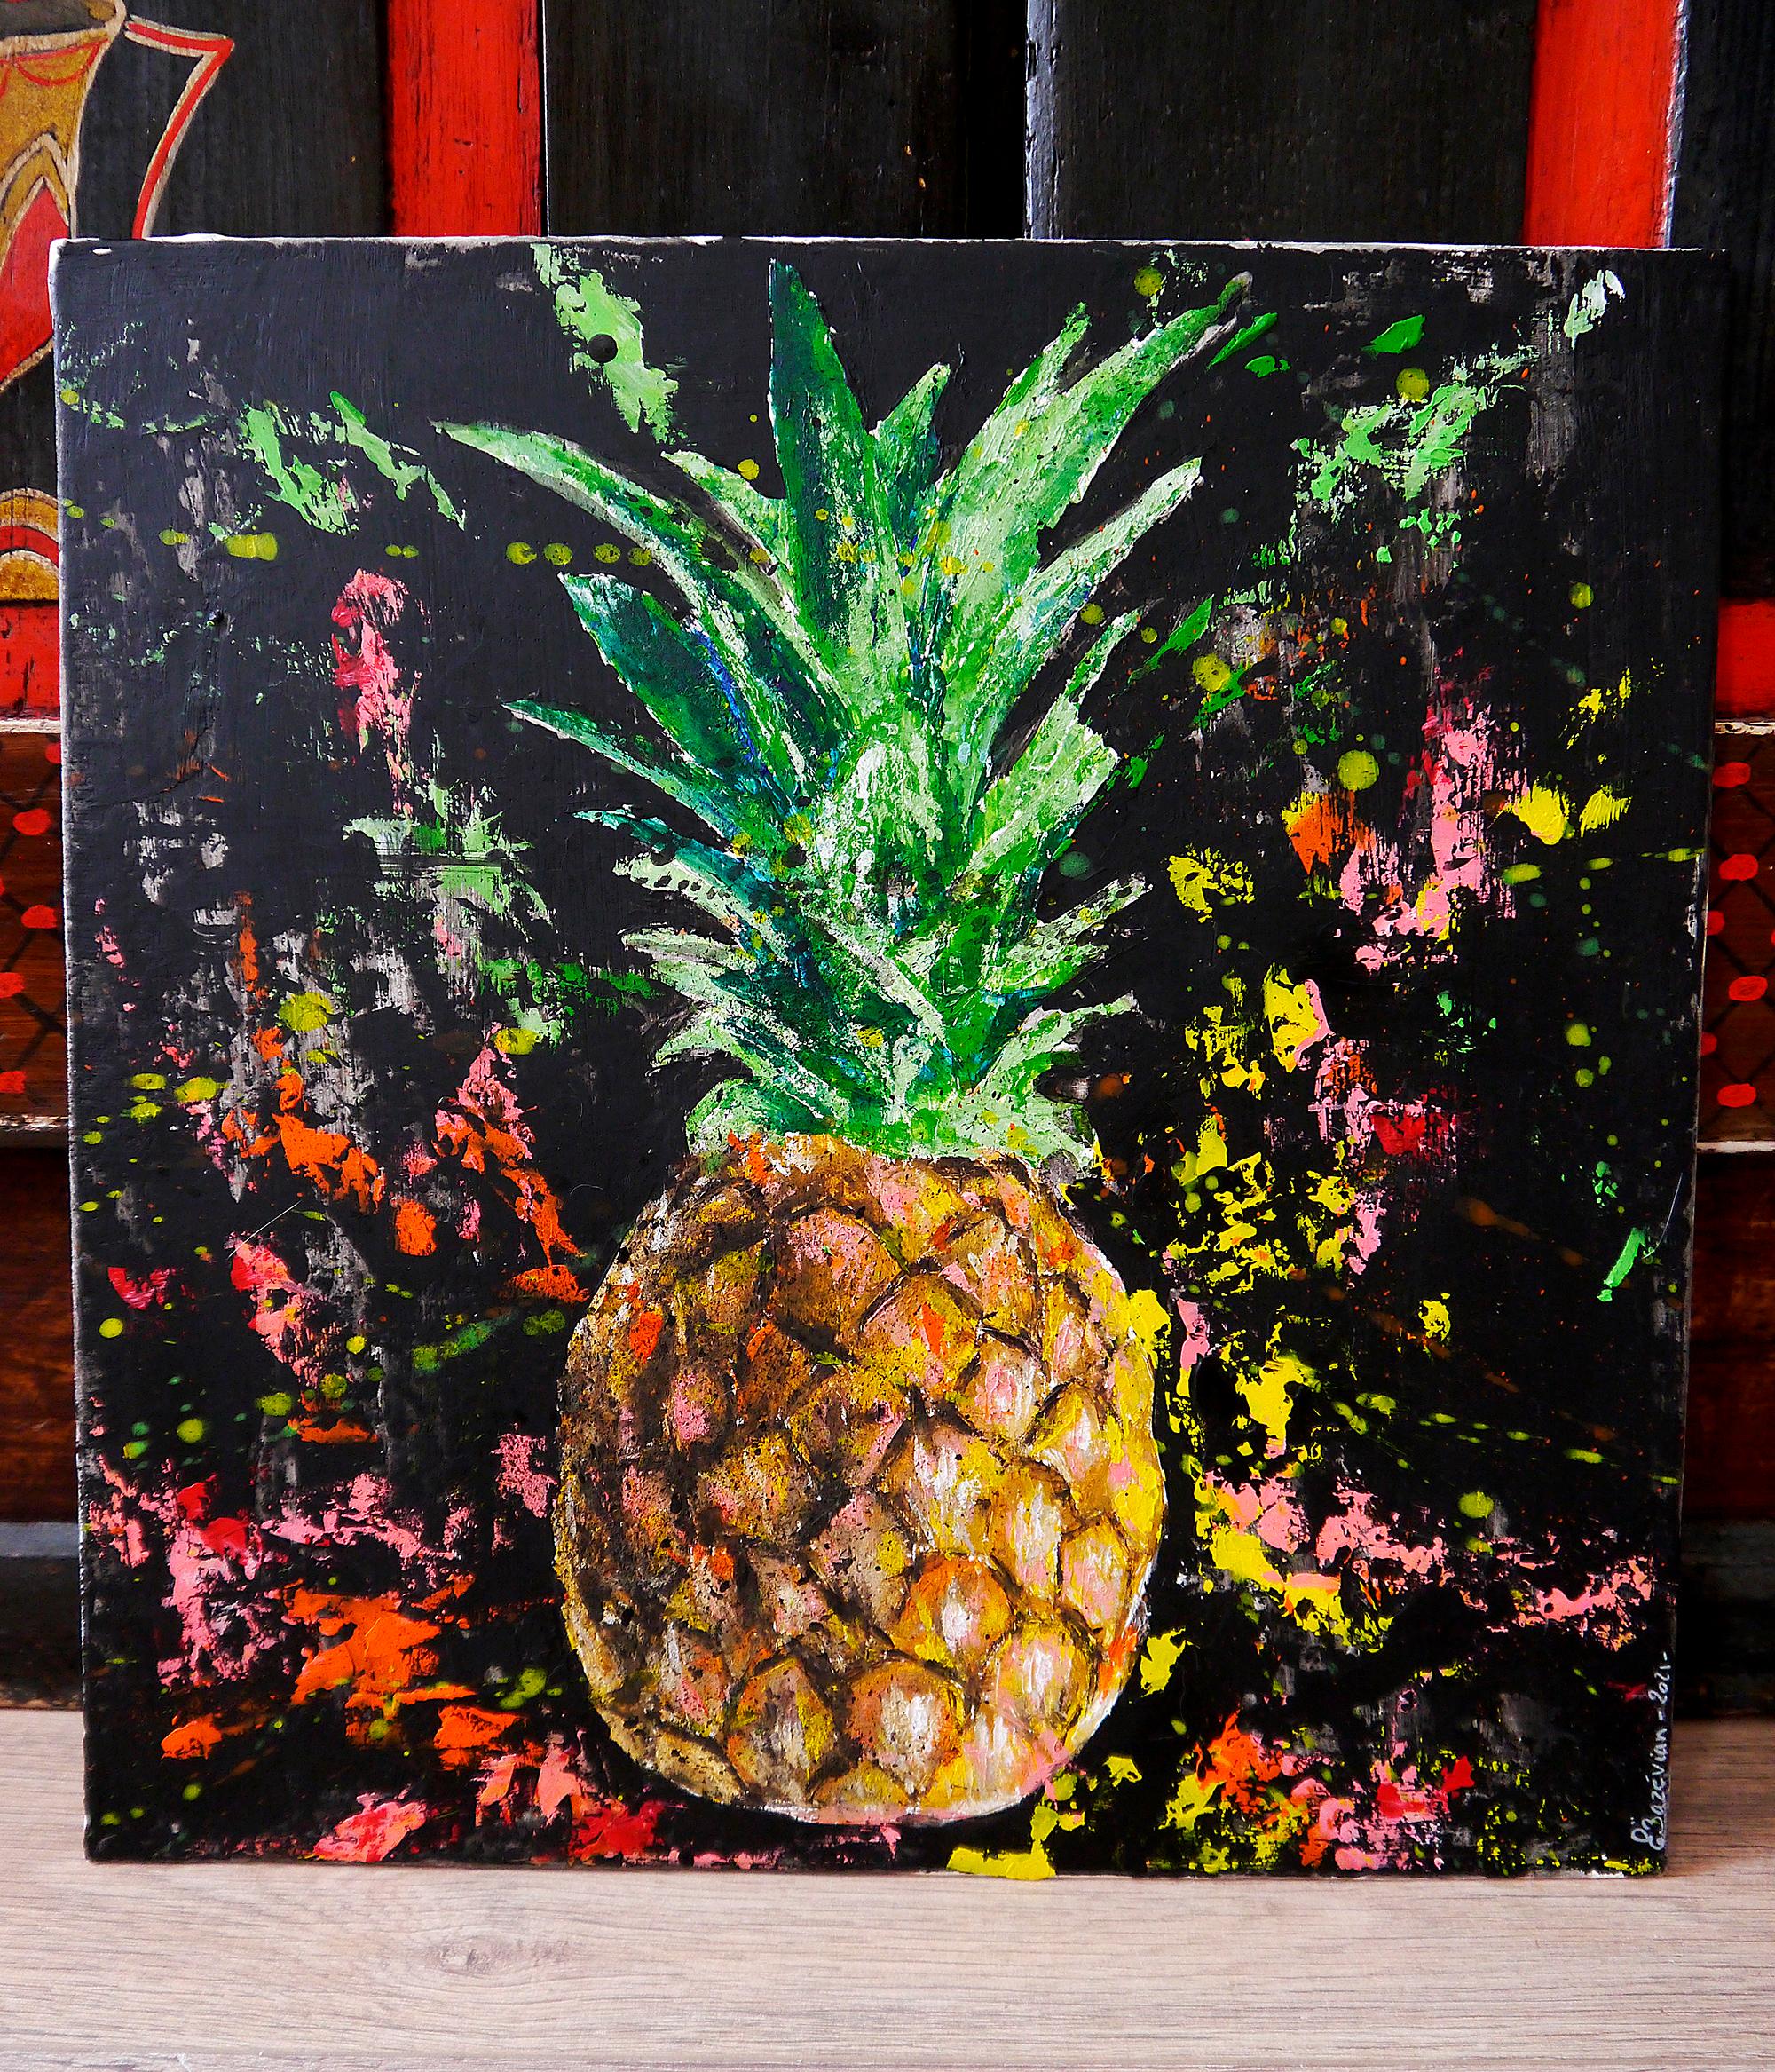 Still life painting - Pineapple Starwars

Structural analysis:
Drippings creates movement.

Technique: oil, acrylic, and ink on  cardboard canvas  40 x 40cm (15.75x15.75 inch)

》》R E A D Y -- T O -- H A N G《《


❶ → Original signed work. Certificate